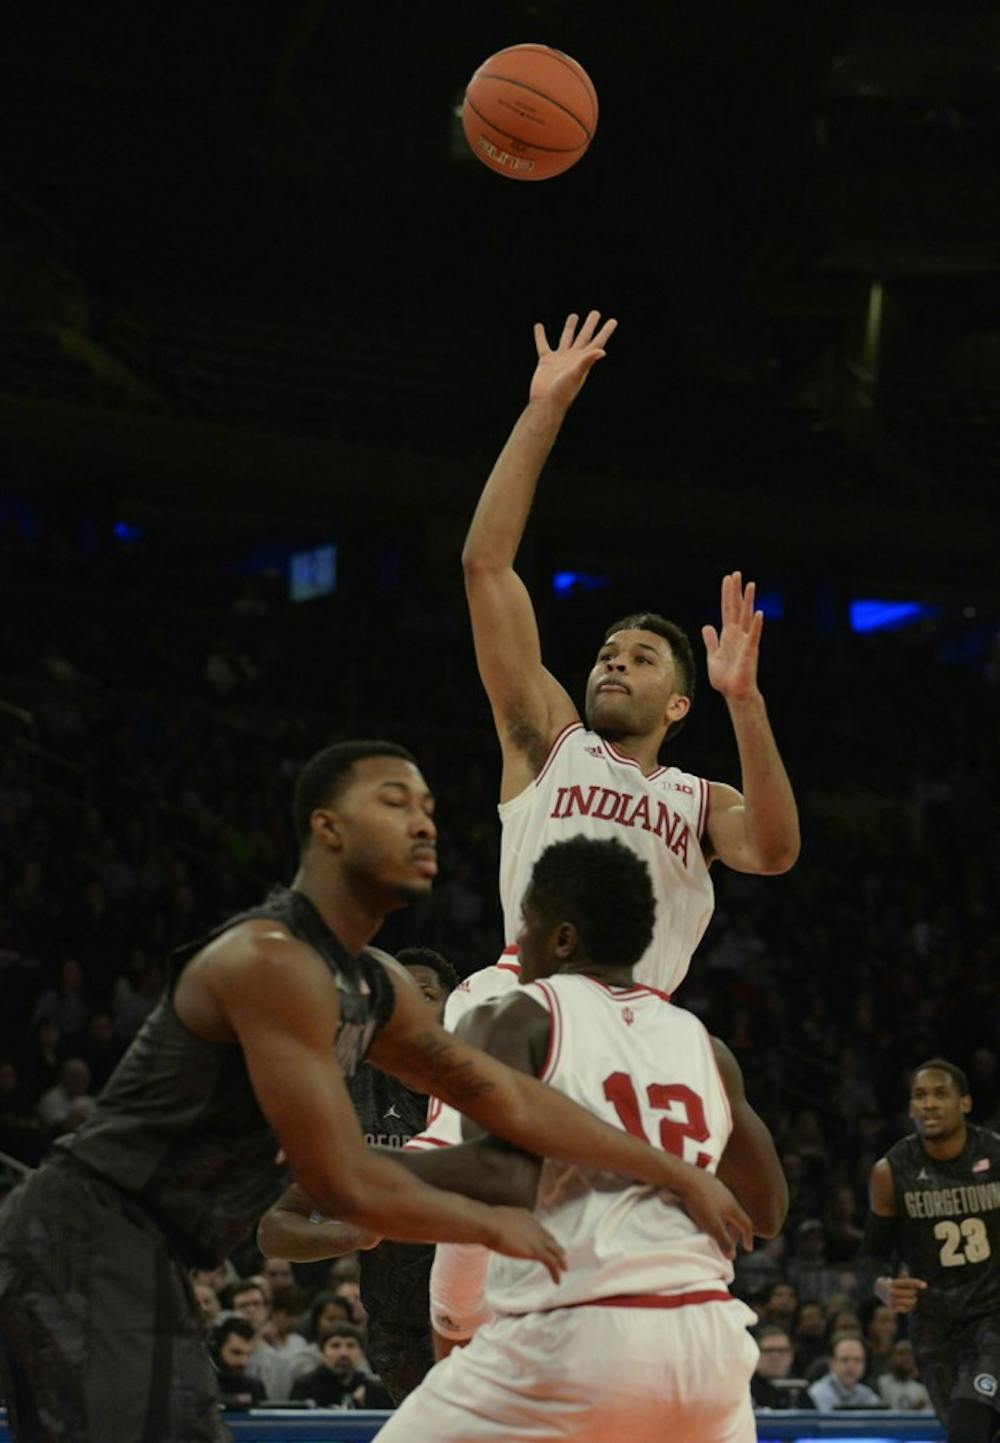 Freshman guard James Blackmon Jr. shoots the ball during IU's game against Georgetown on Saturday at Madison Square Garden in New York City. Blackmon Jr. scored 22 points in IU's 91-87 loss.